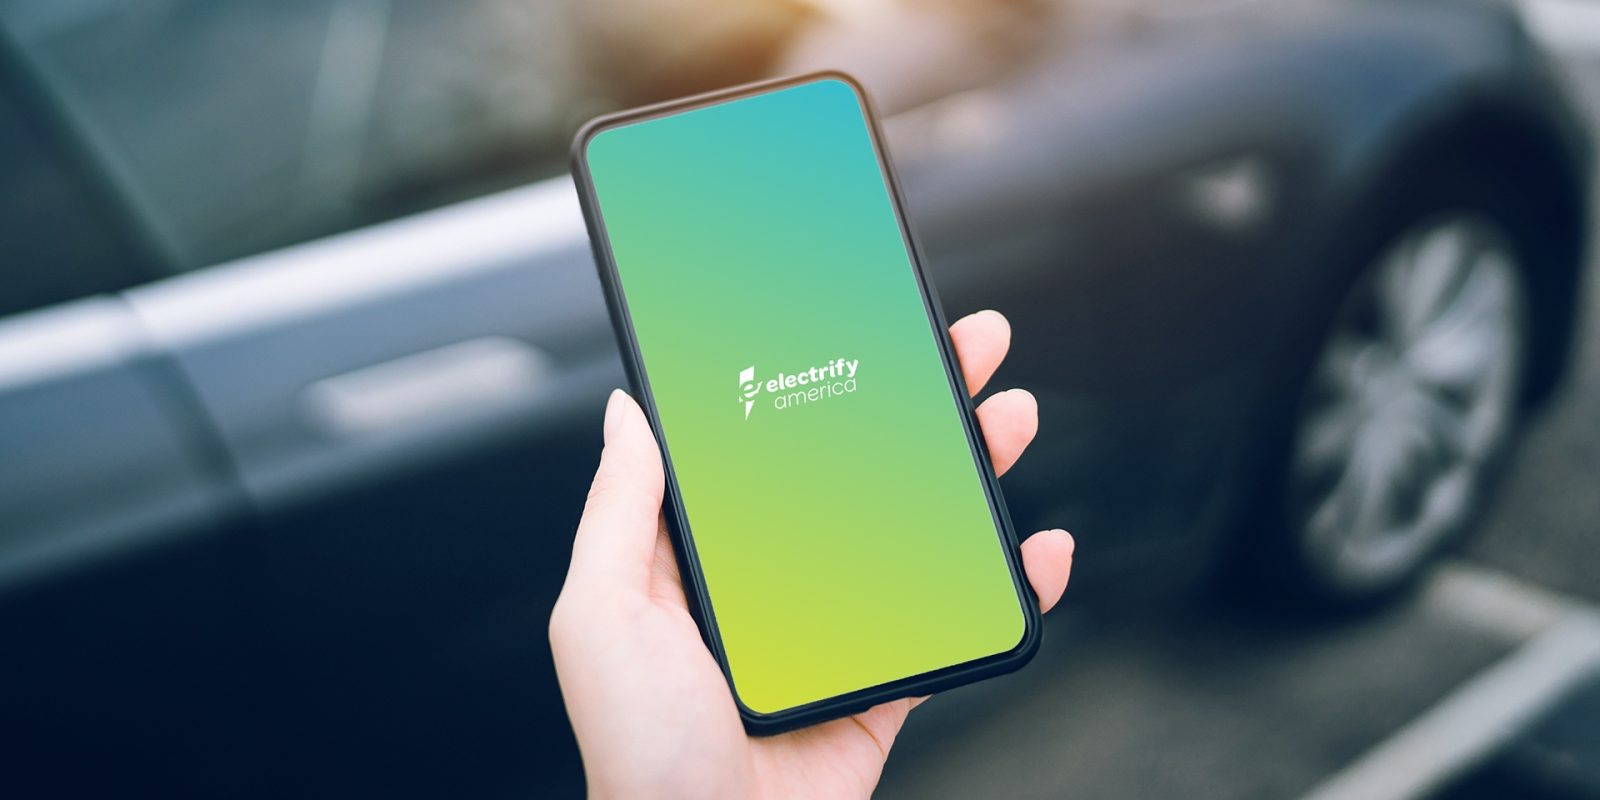 Electrify America's mobile app has launched